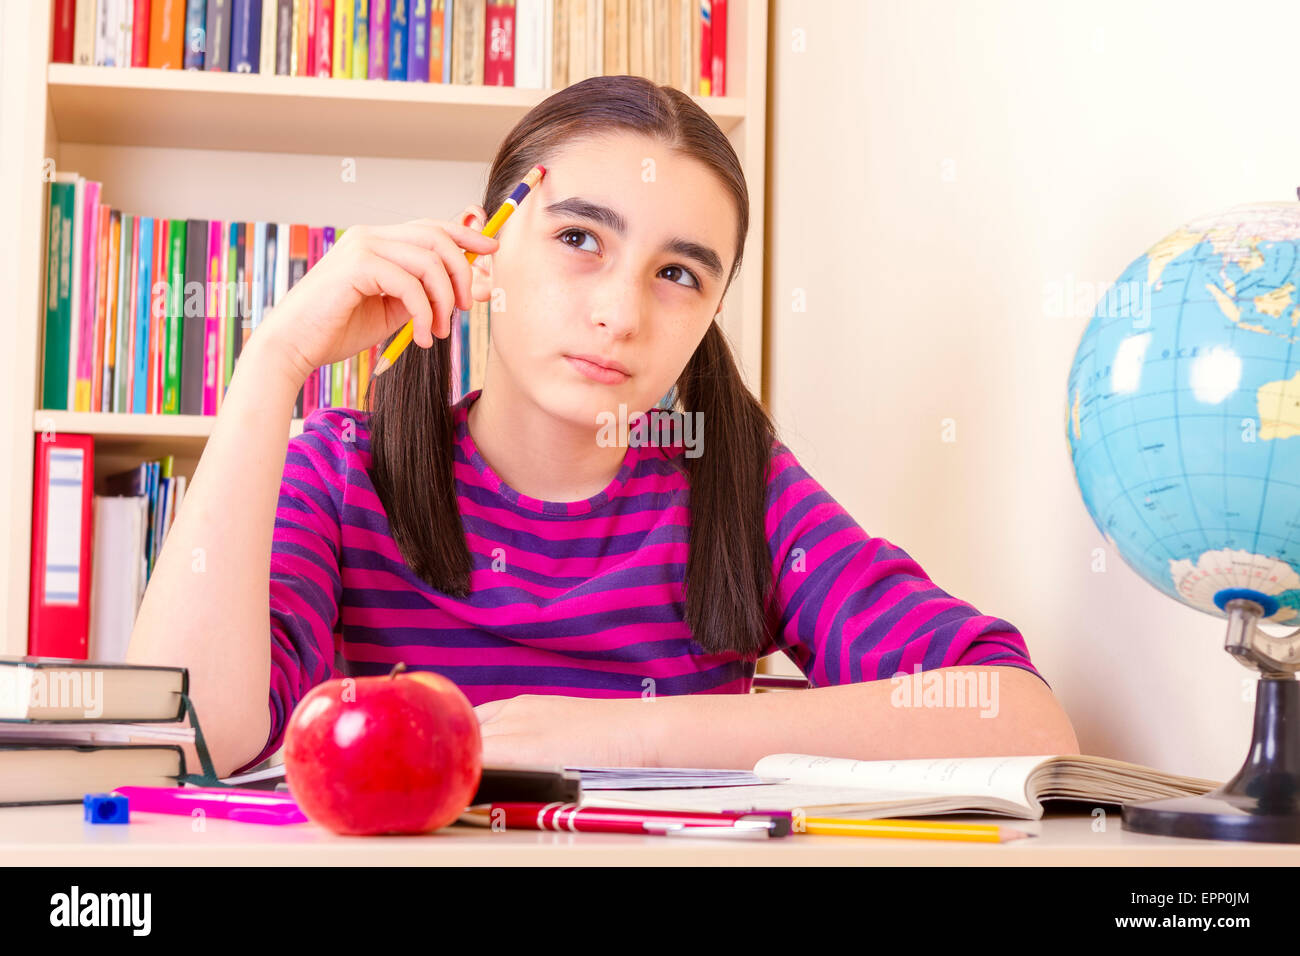 Little schoolgirl holding a pencil and thinking. Stock Photo